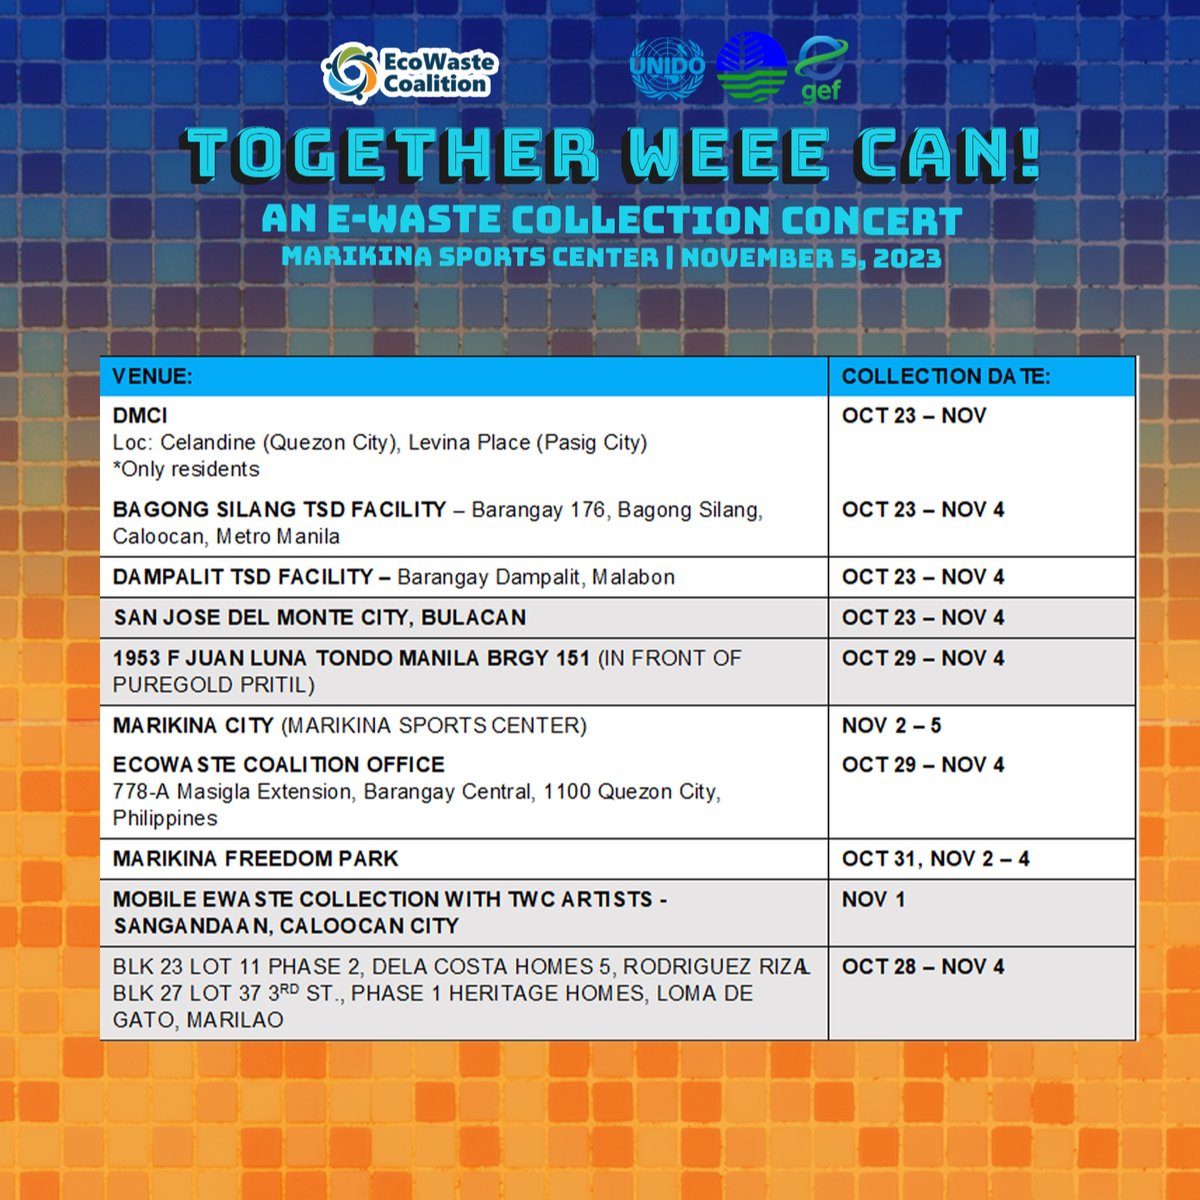 We are still accepting e-waste in exchange for concert tickets! Watch our amazing line up of artist who will be performing for the #TogetherWEEECan concert on November 5, 2023 | Marikina Sport Center!